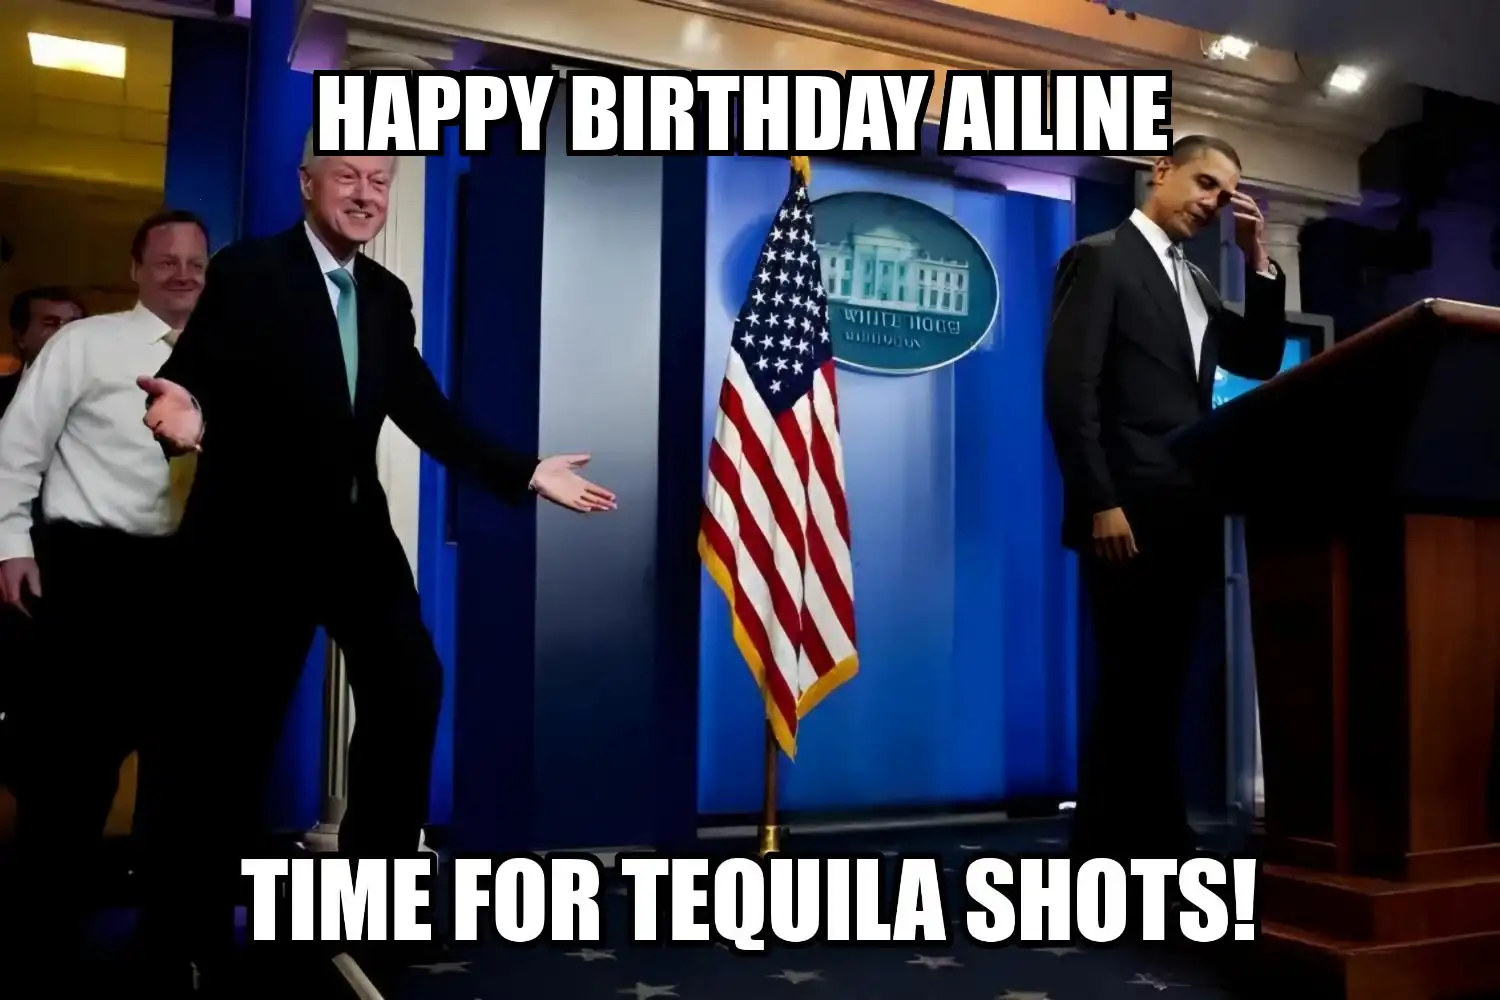 Happy Birthday Ailine Time For Tequila Shots Memes